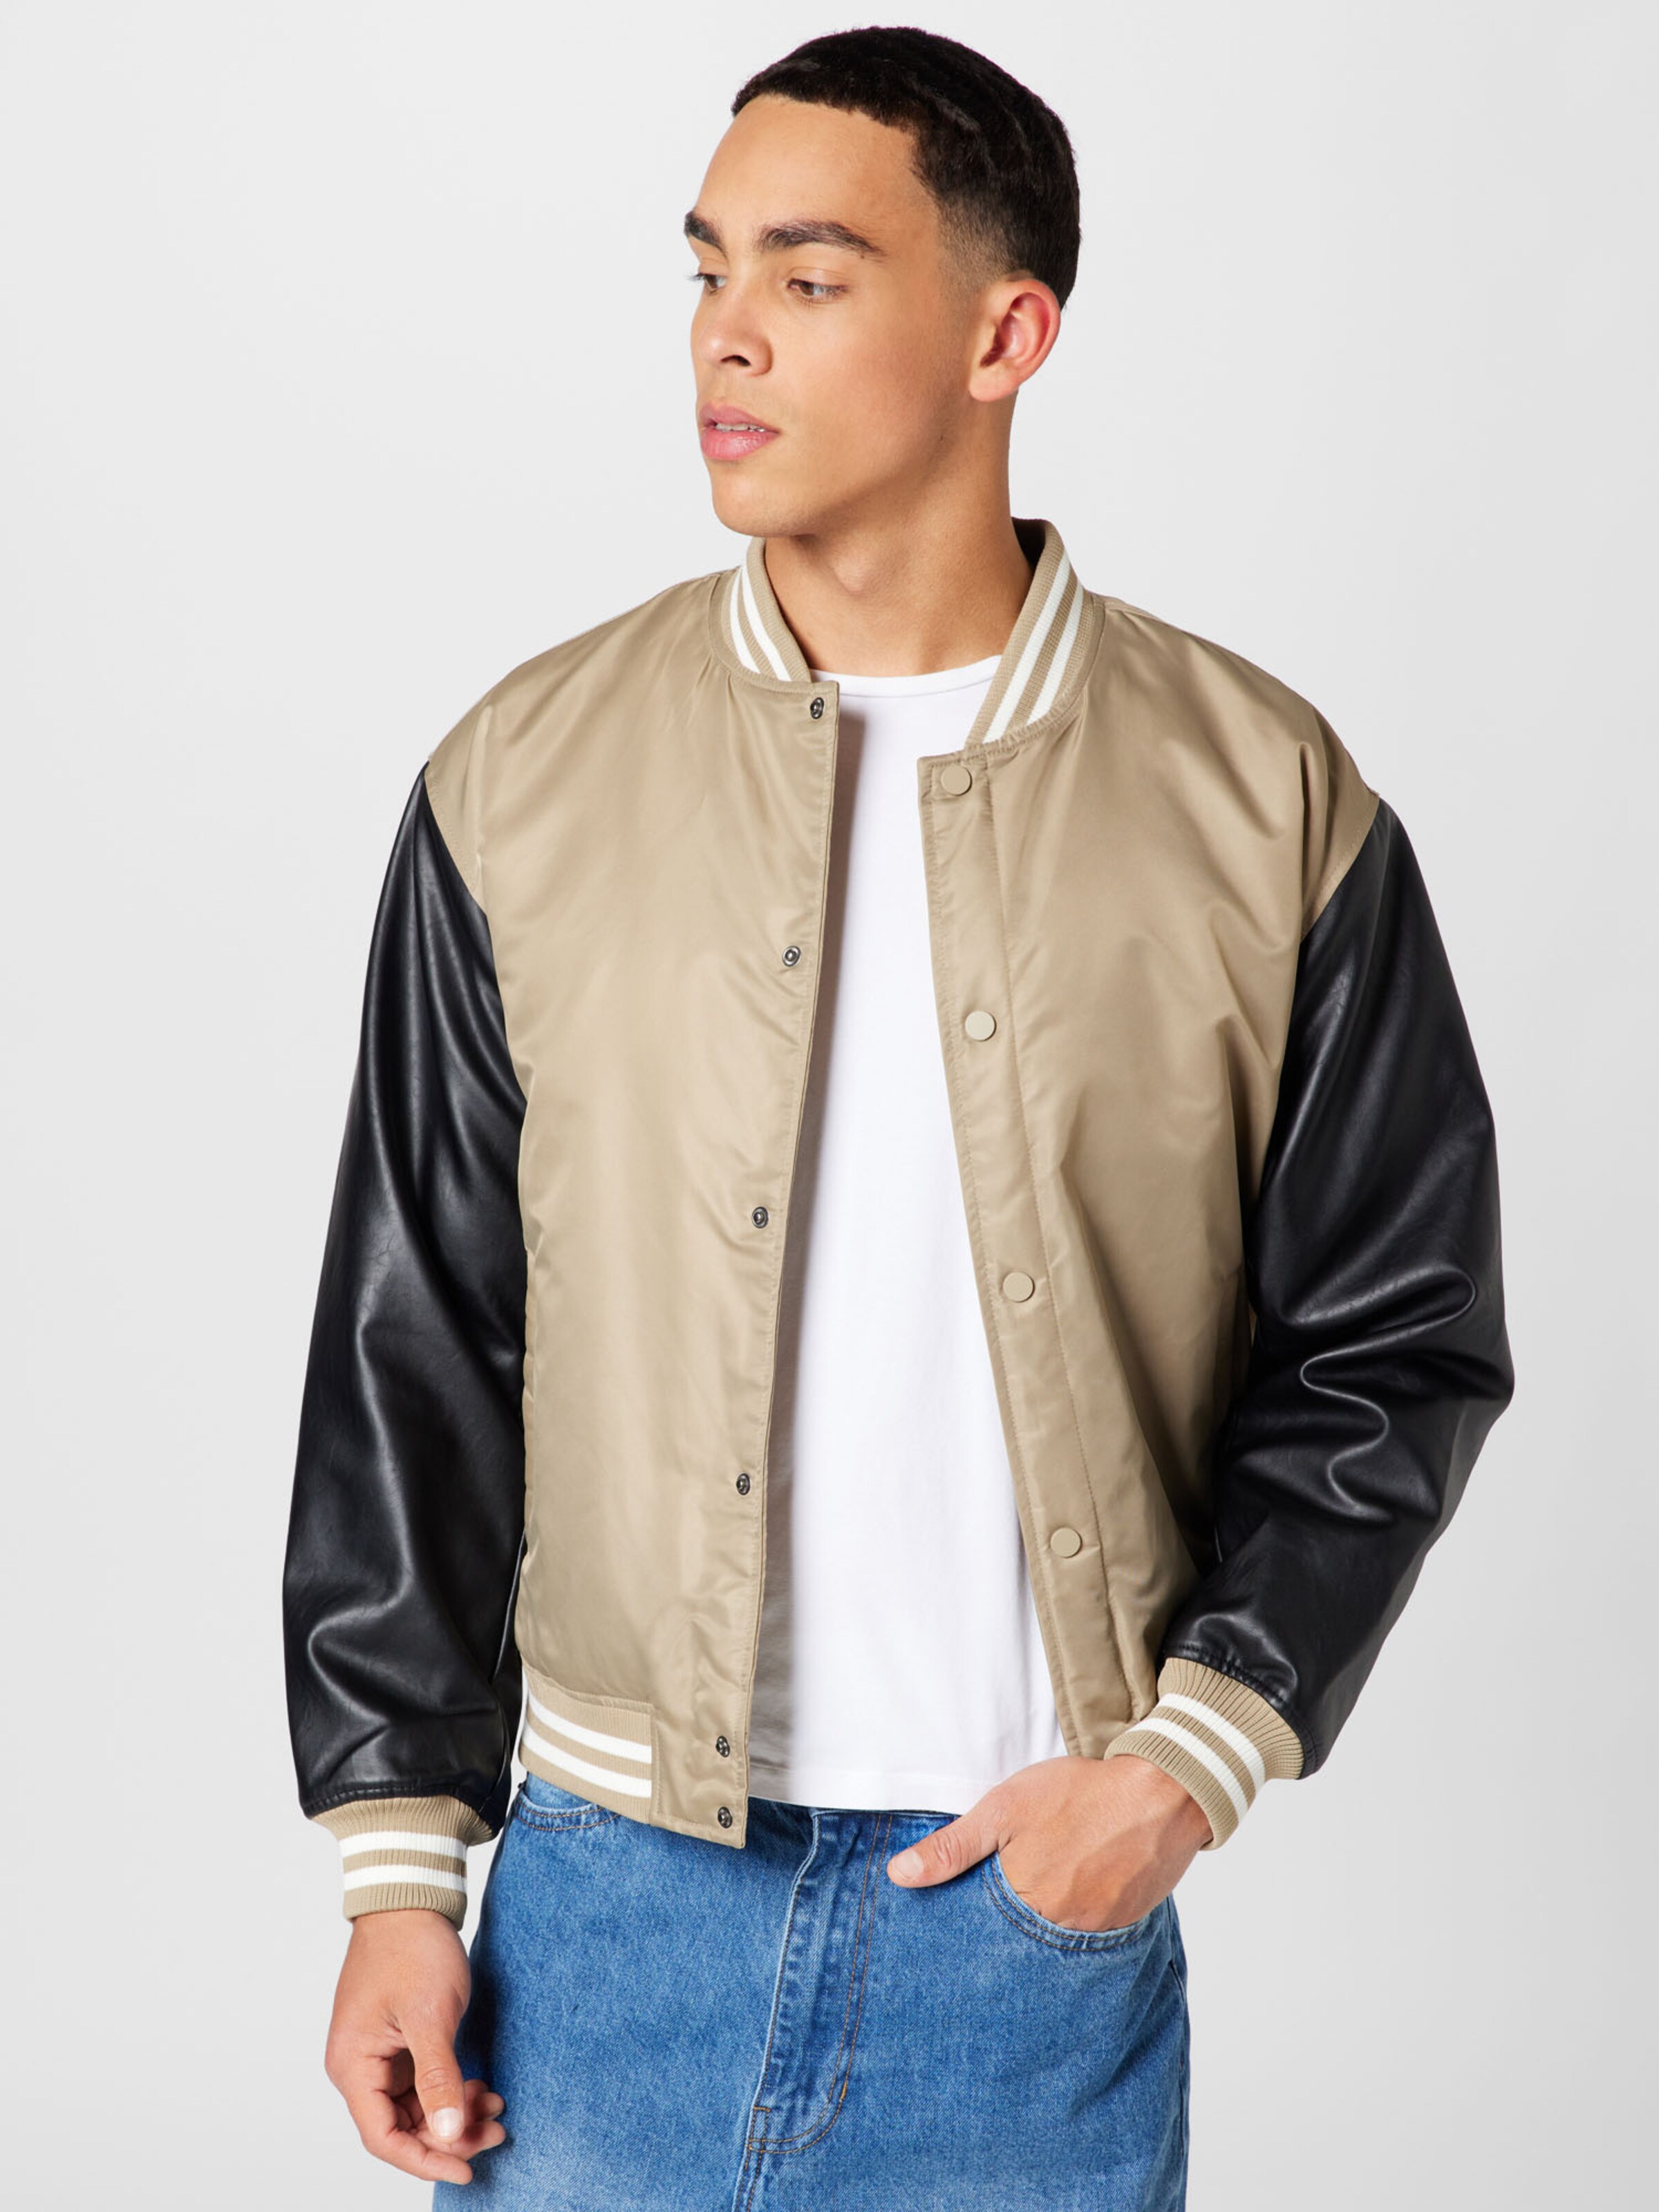 Biker jacket with chest pockets | Black | ONLY & SONS®